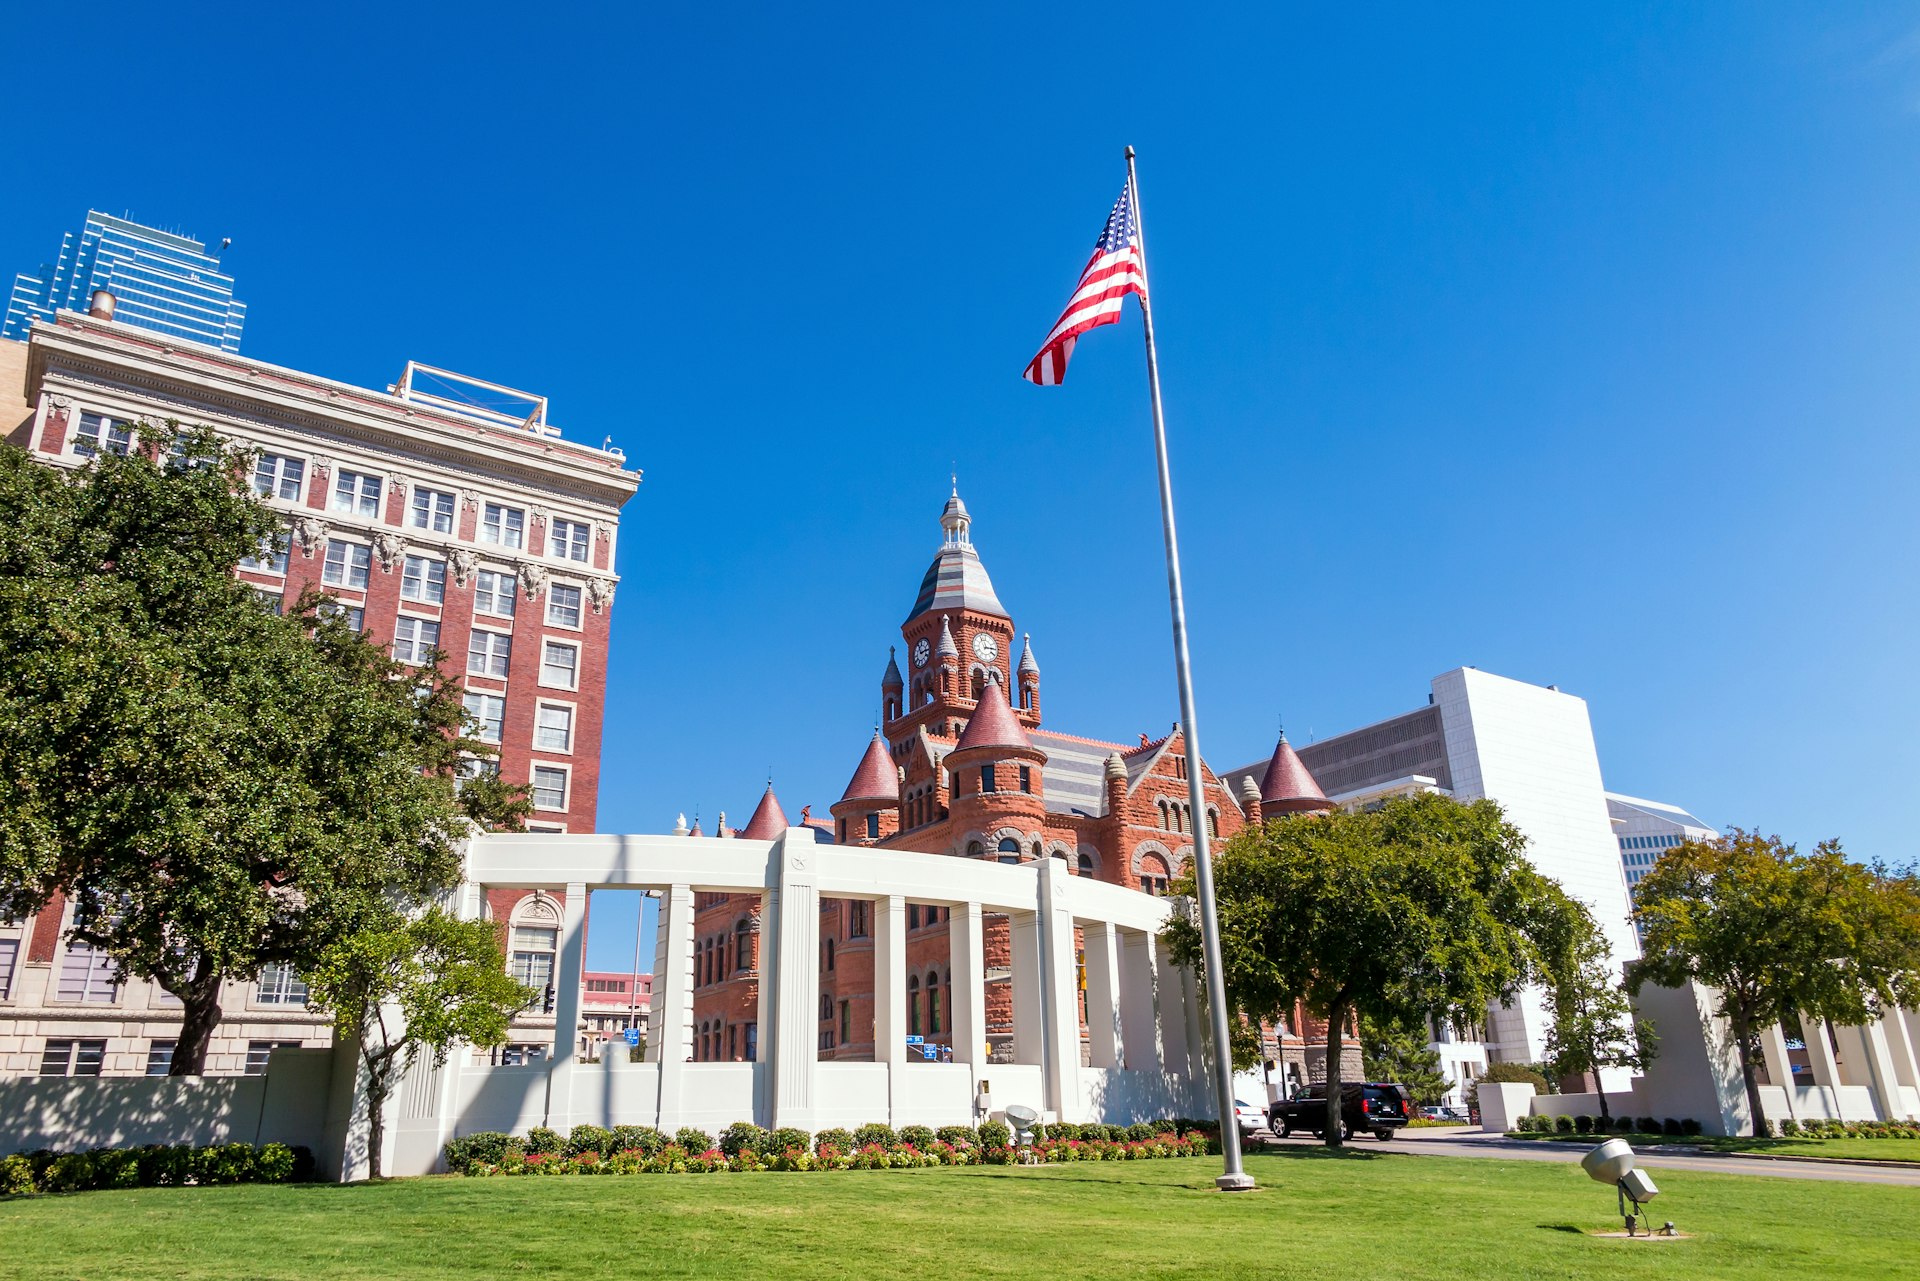 Dealey Plaza and its surrounding buildings in downtown Dallas